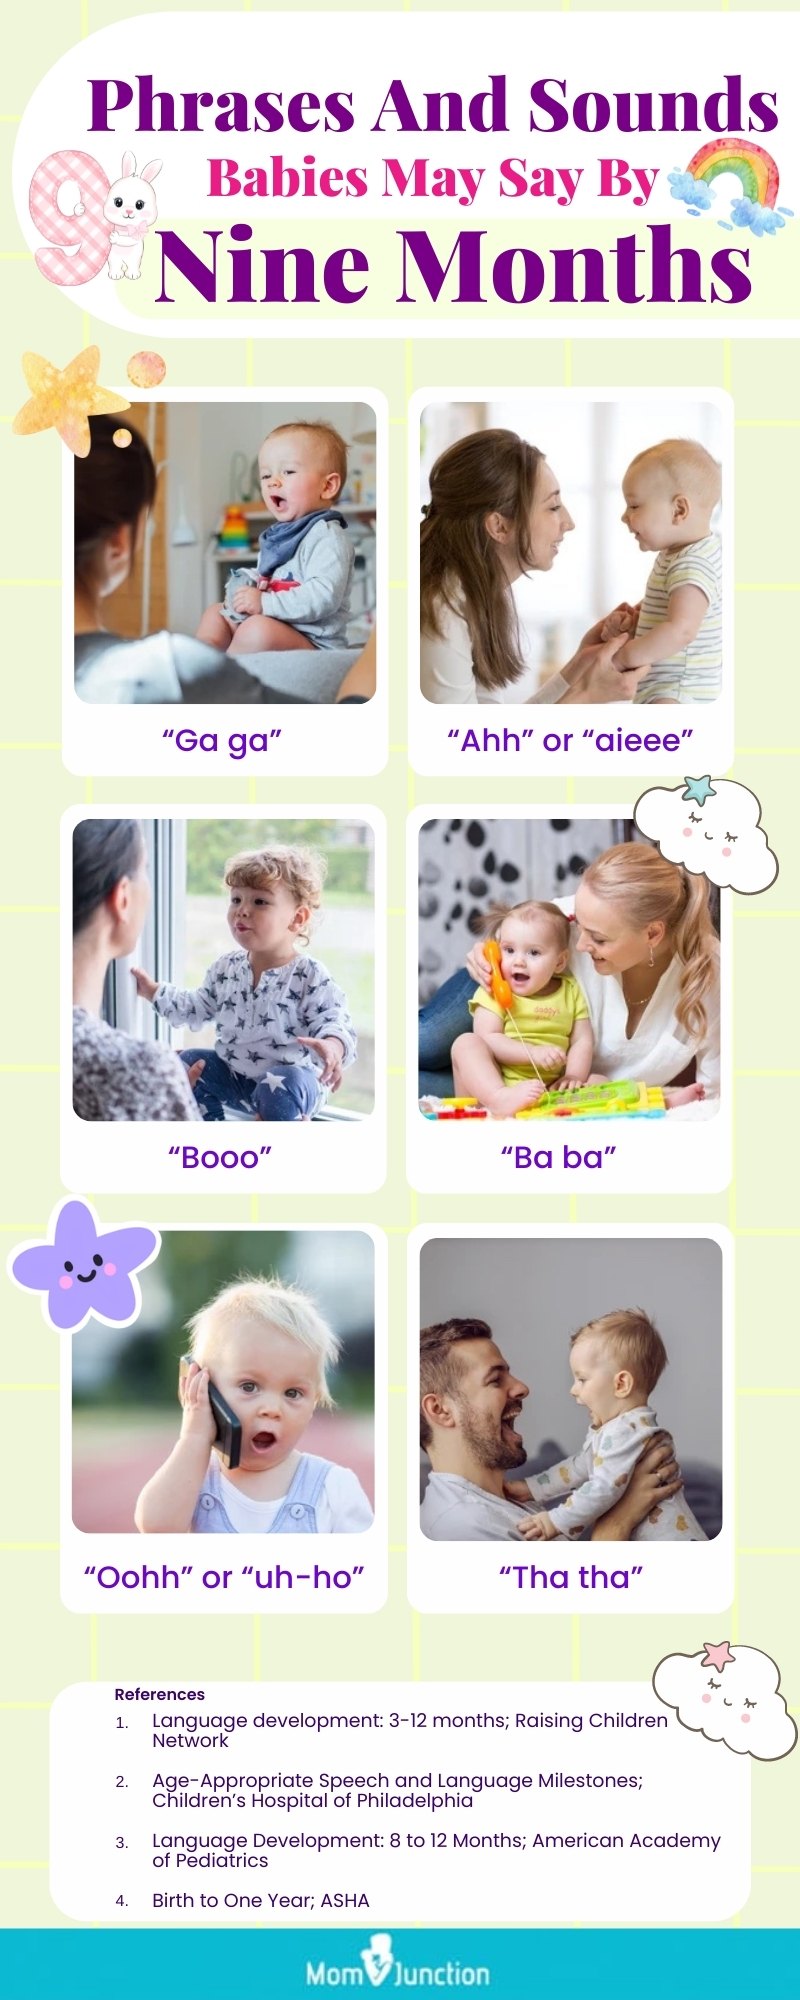 phrases and sounds babies may say by nine months [infographic]